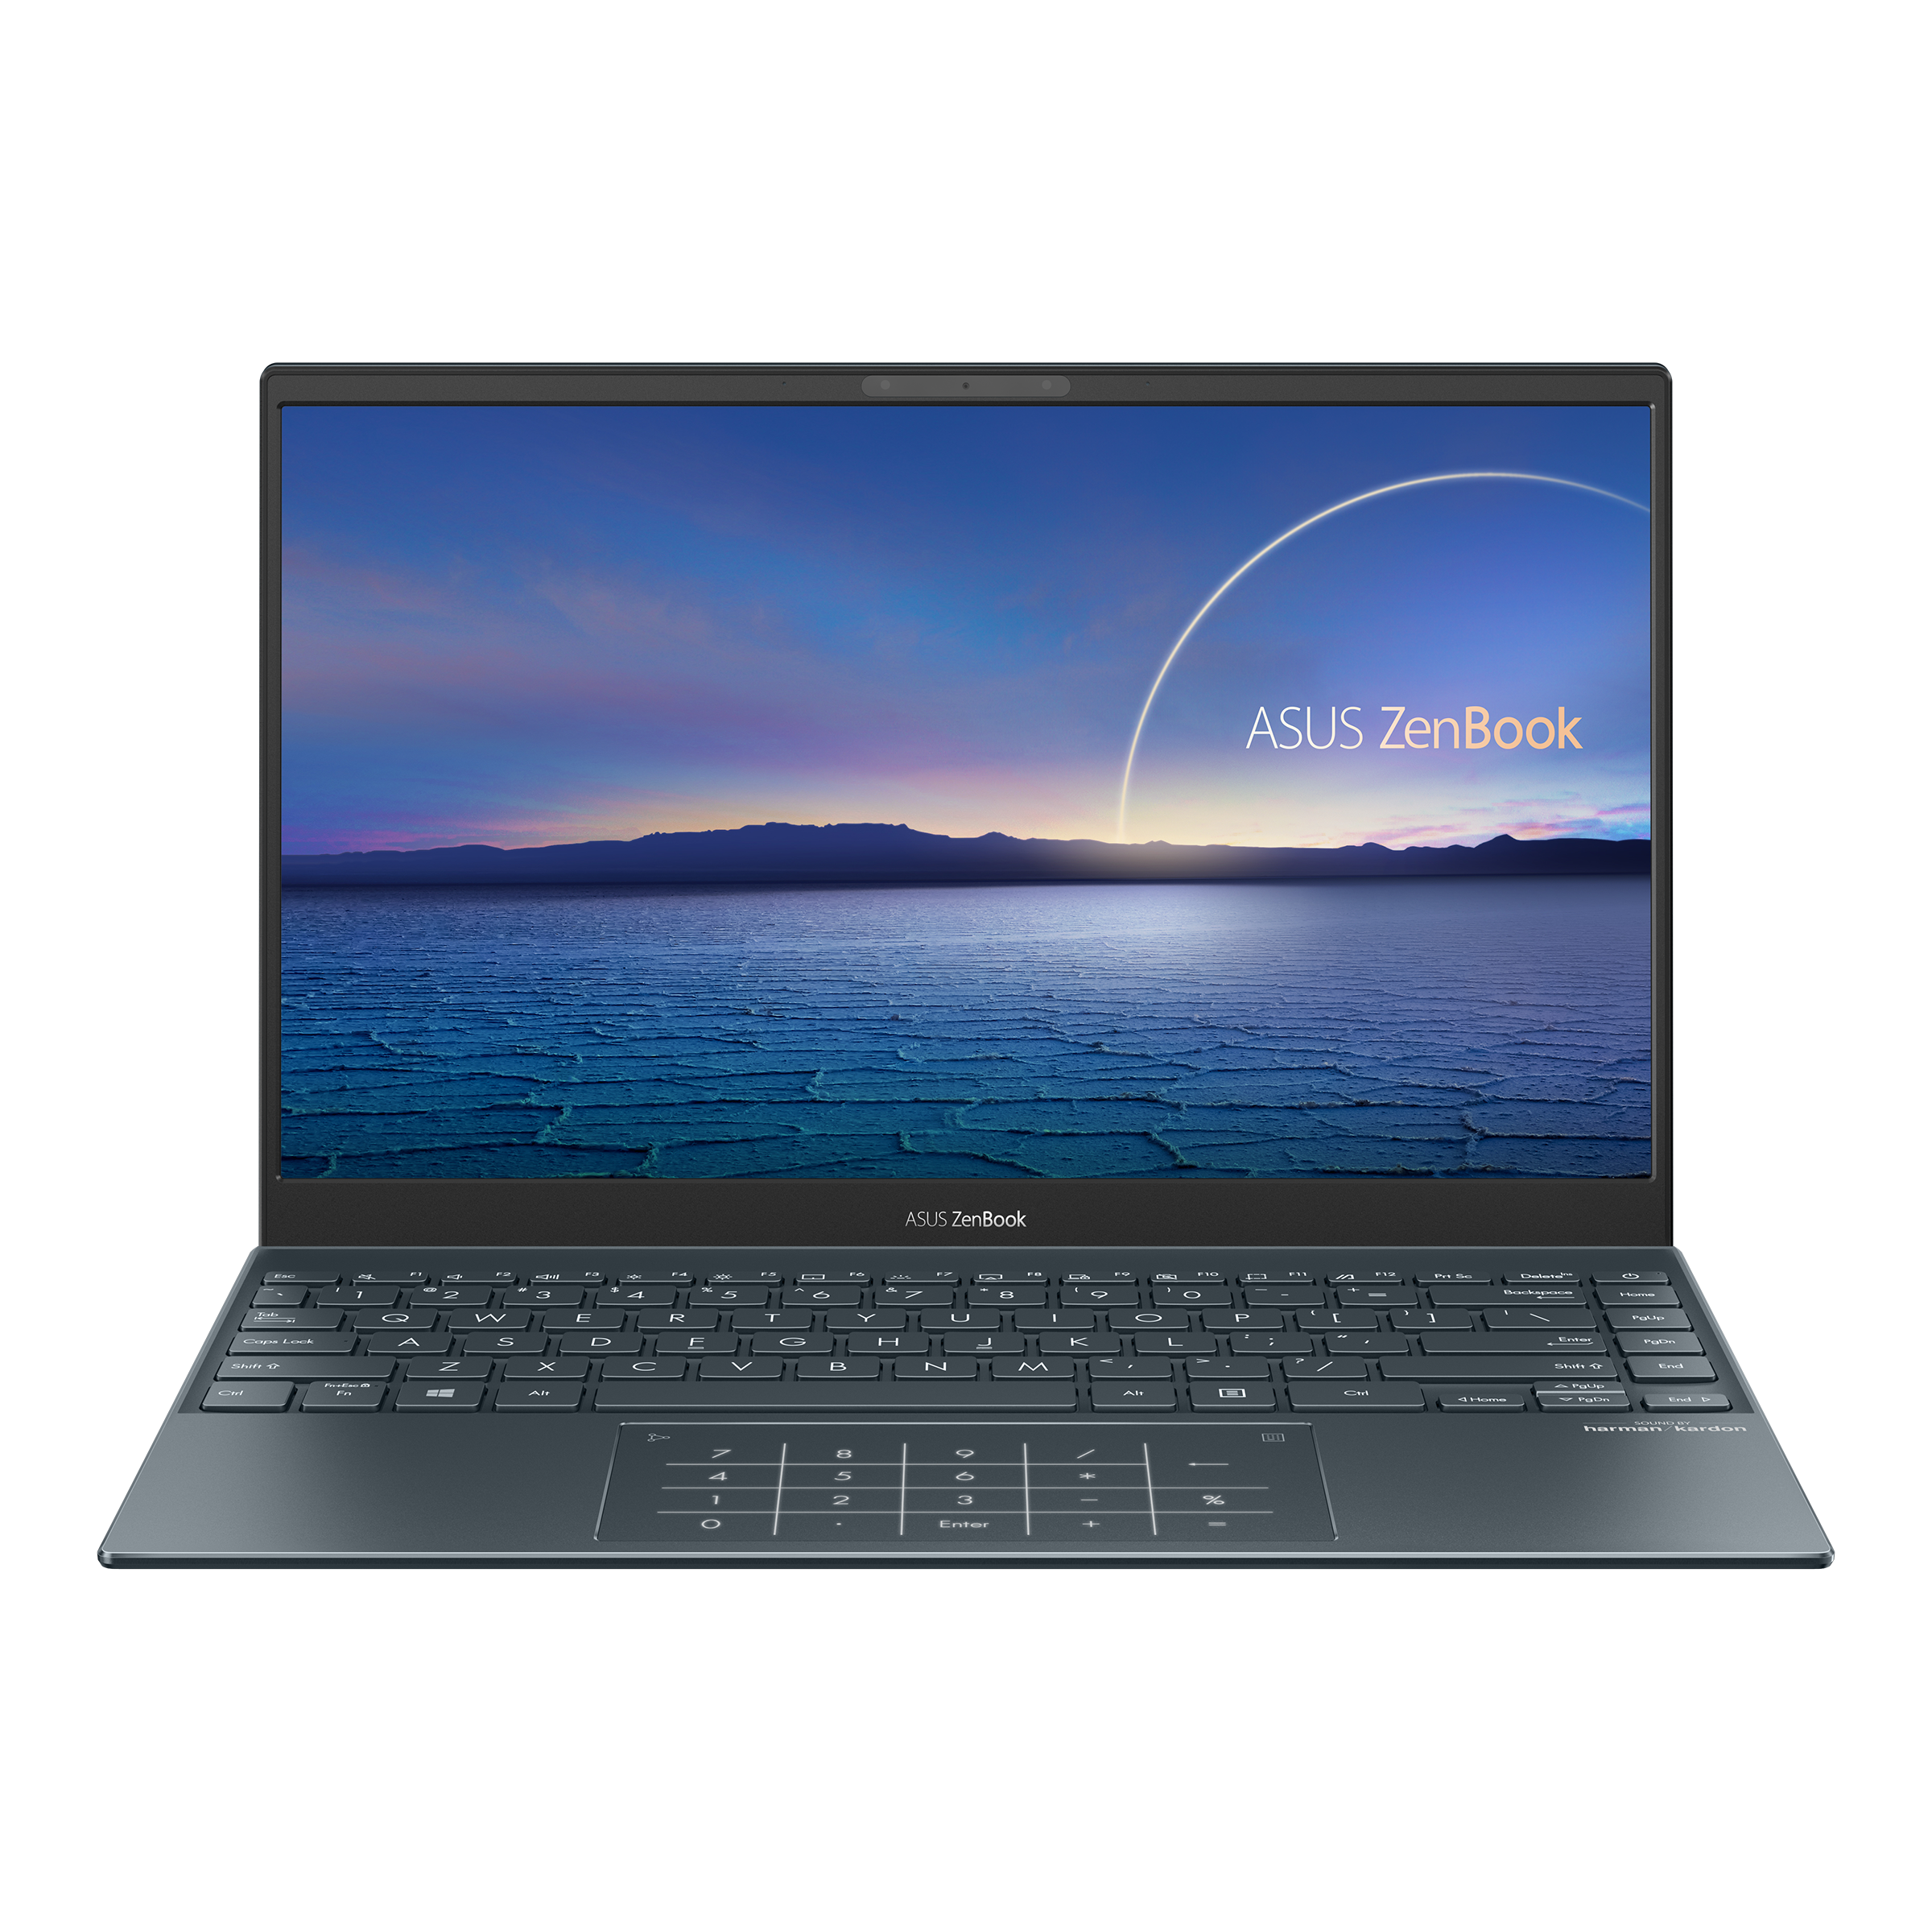 ASUS ZenBook Pro UX535LH-BO063T 15,6"" Wideview FHD Glare TOUCH-I5-10300H-GTX1650 Max-8GB-512 GB SSD-WIn 10